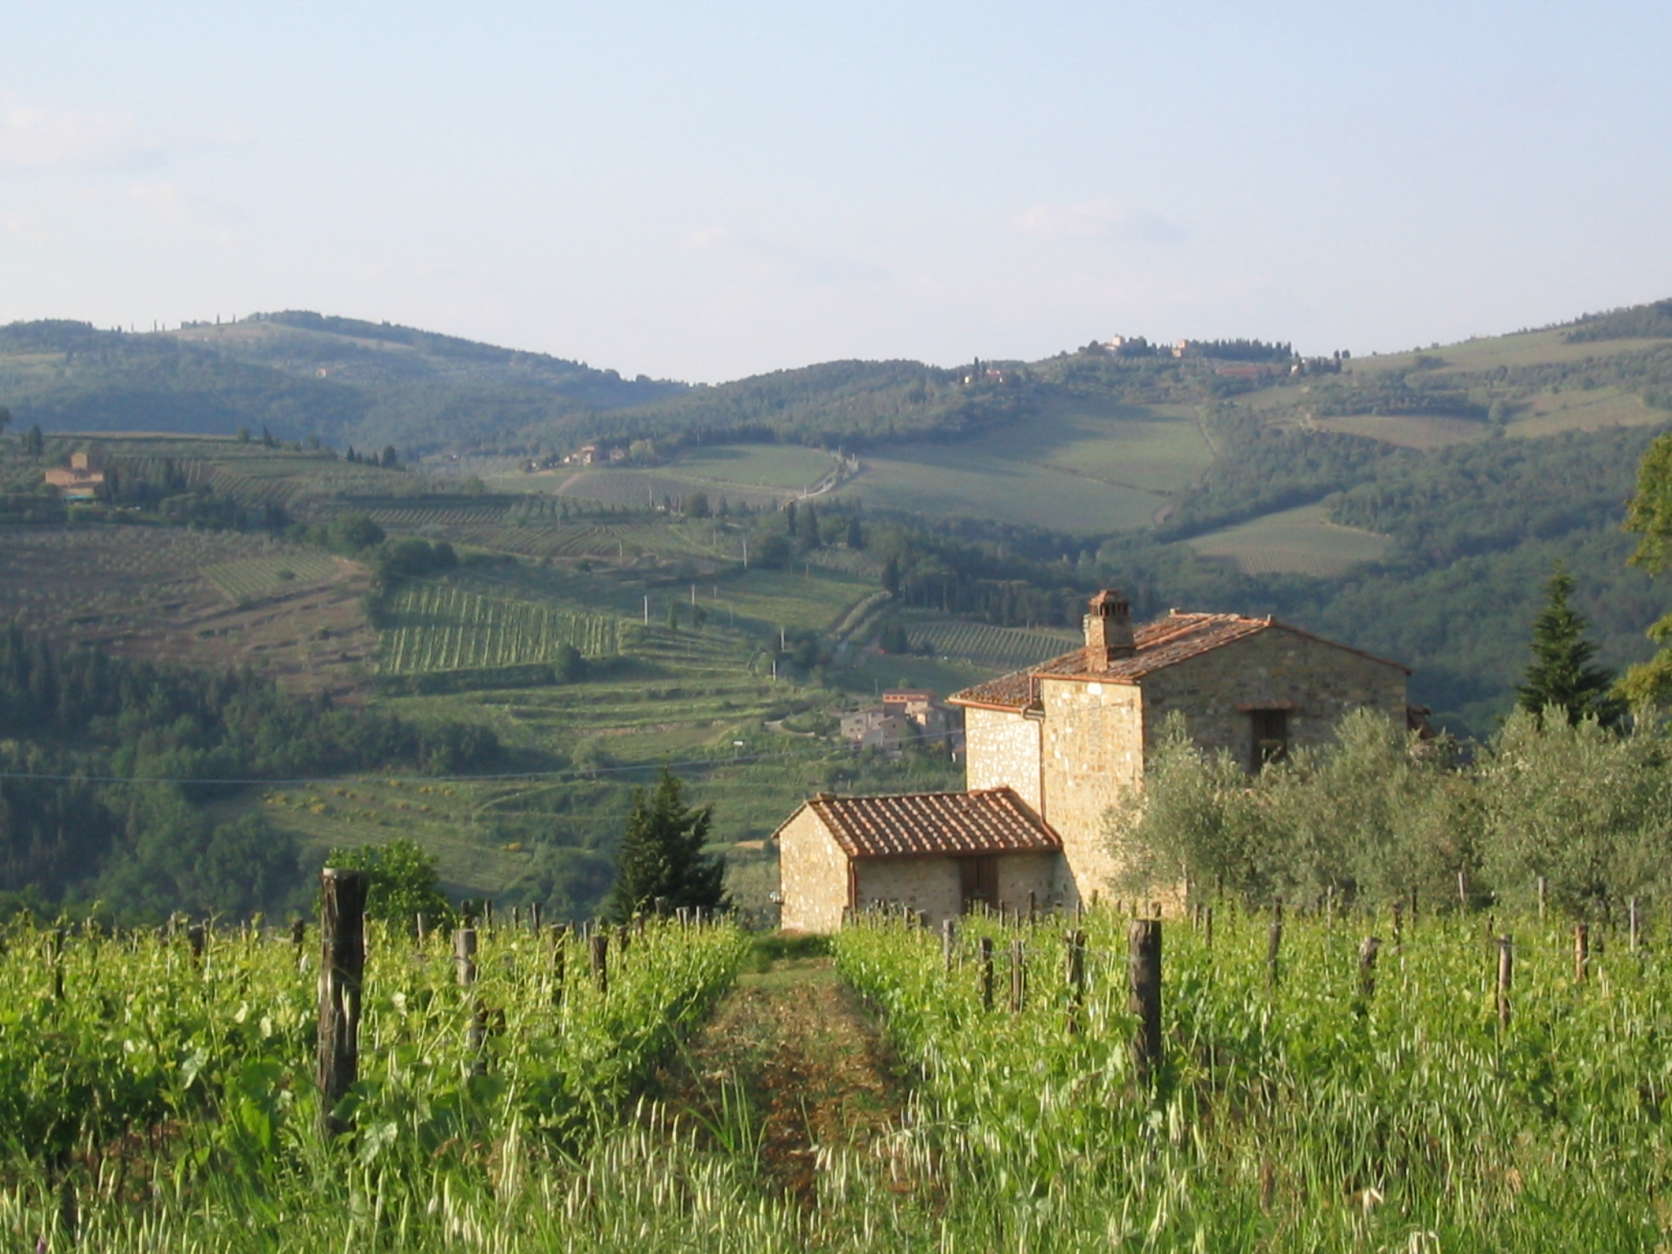 The countryside in the Chianti region of Tuscany, is seen in this May 2004 photo. (AP Photo/Gretchen Heefner)